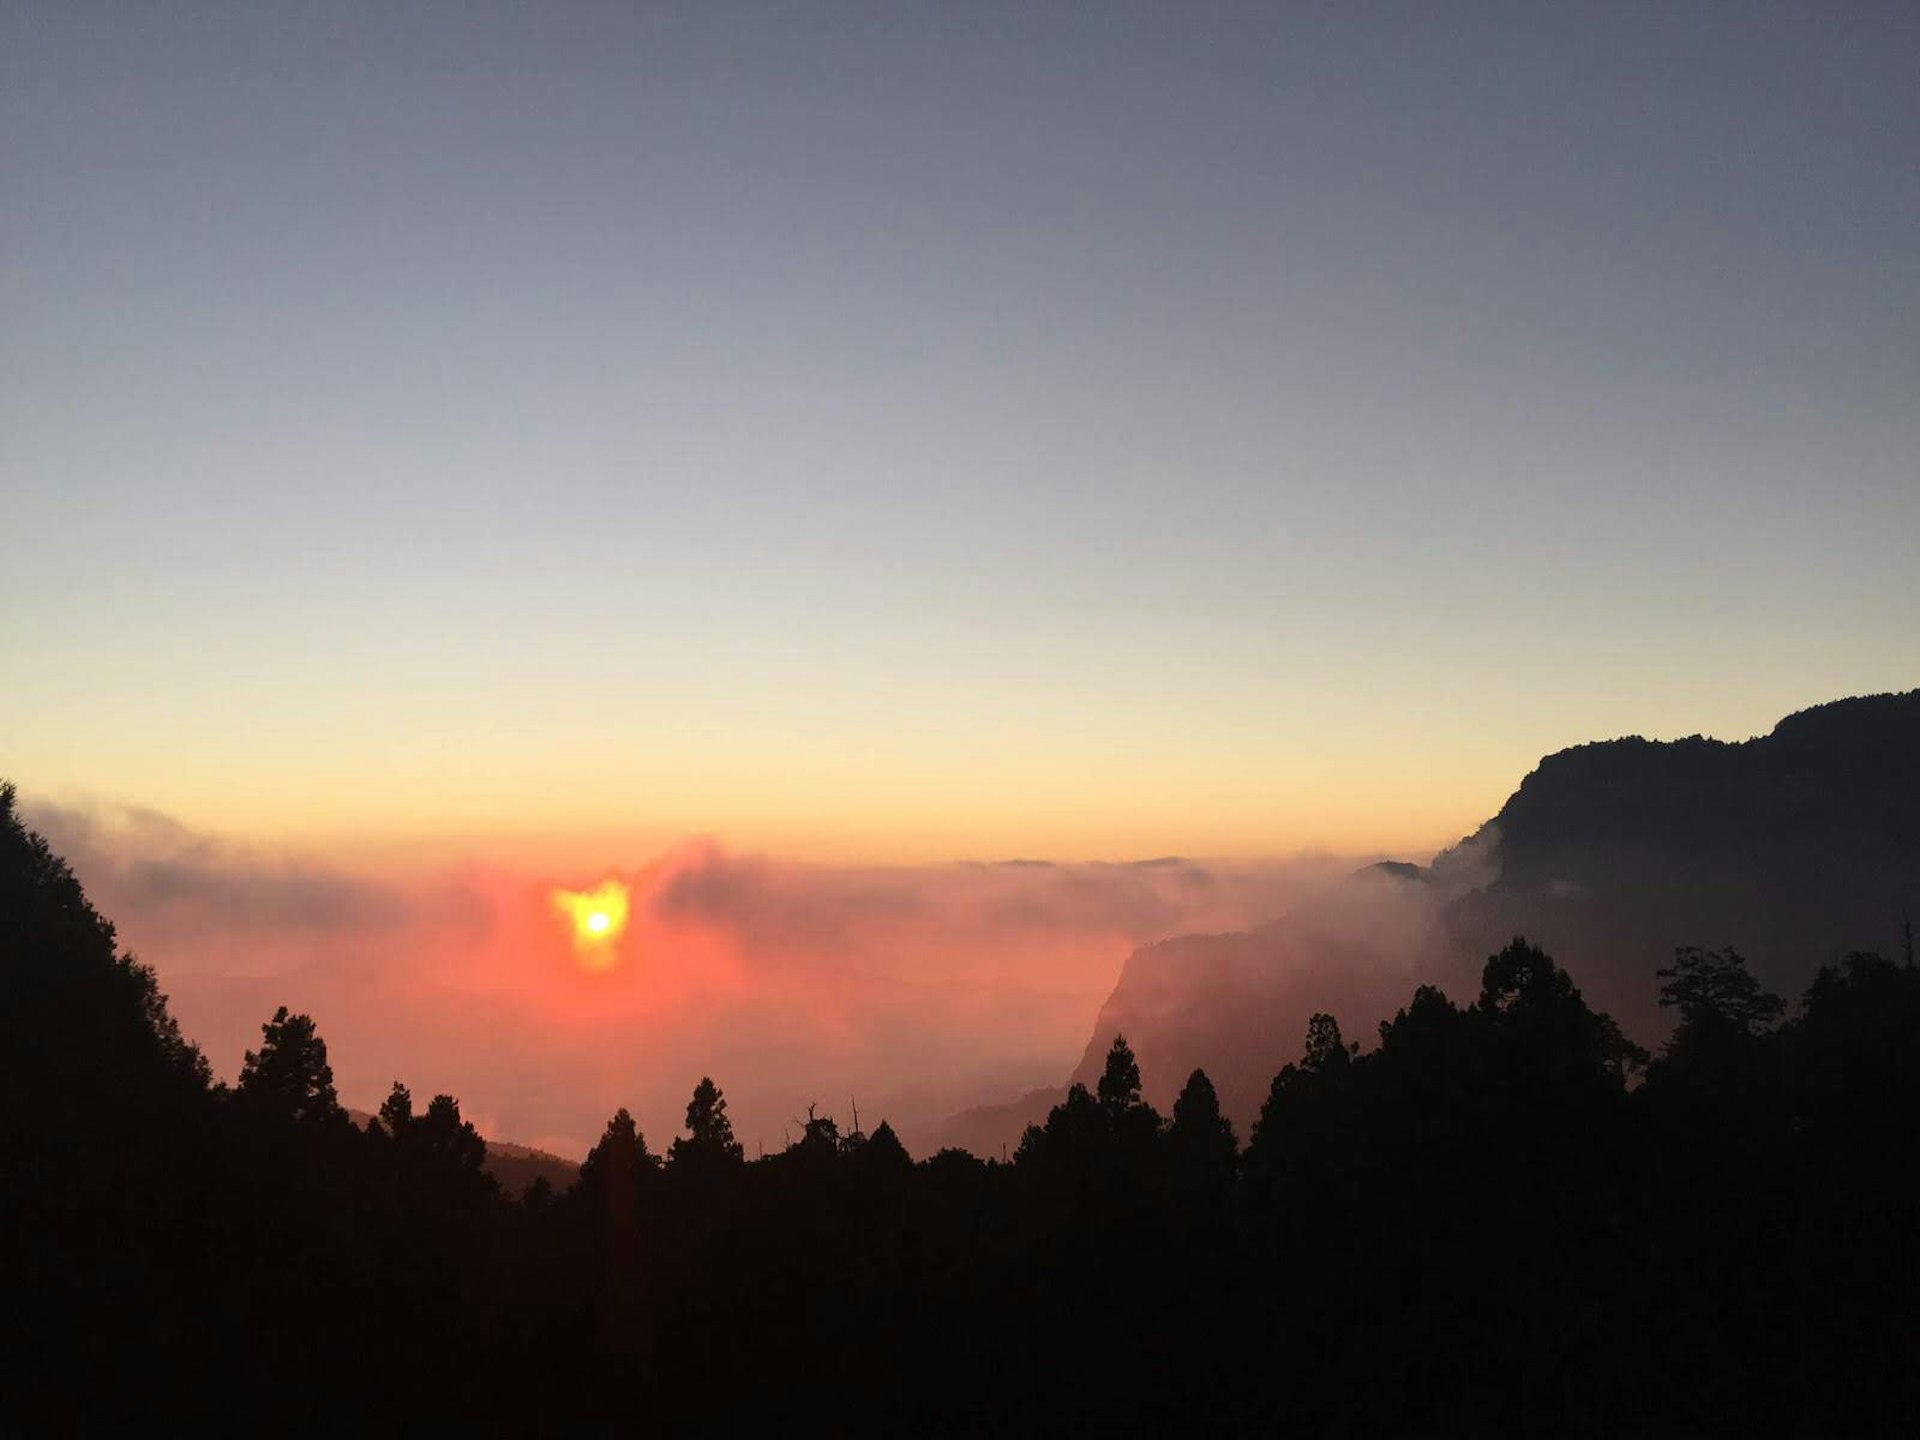 View of the sunset from the rooftop deck of the Alishan House Hotel © Megan Eaves / Lonely Planet